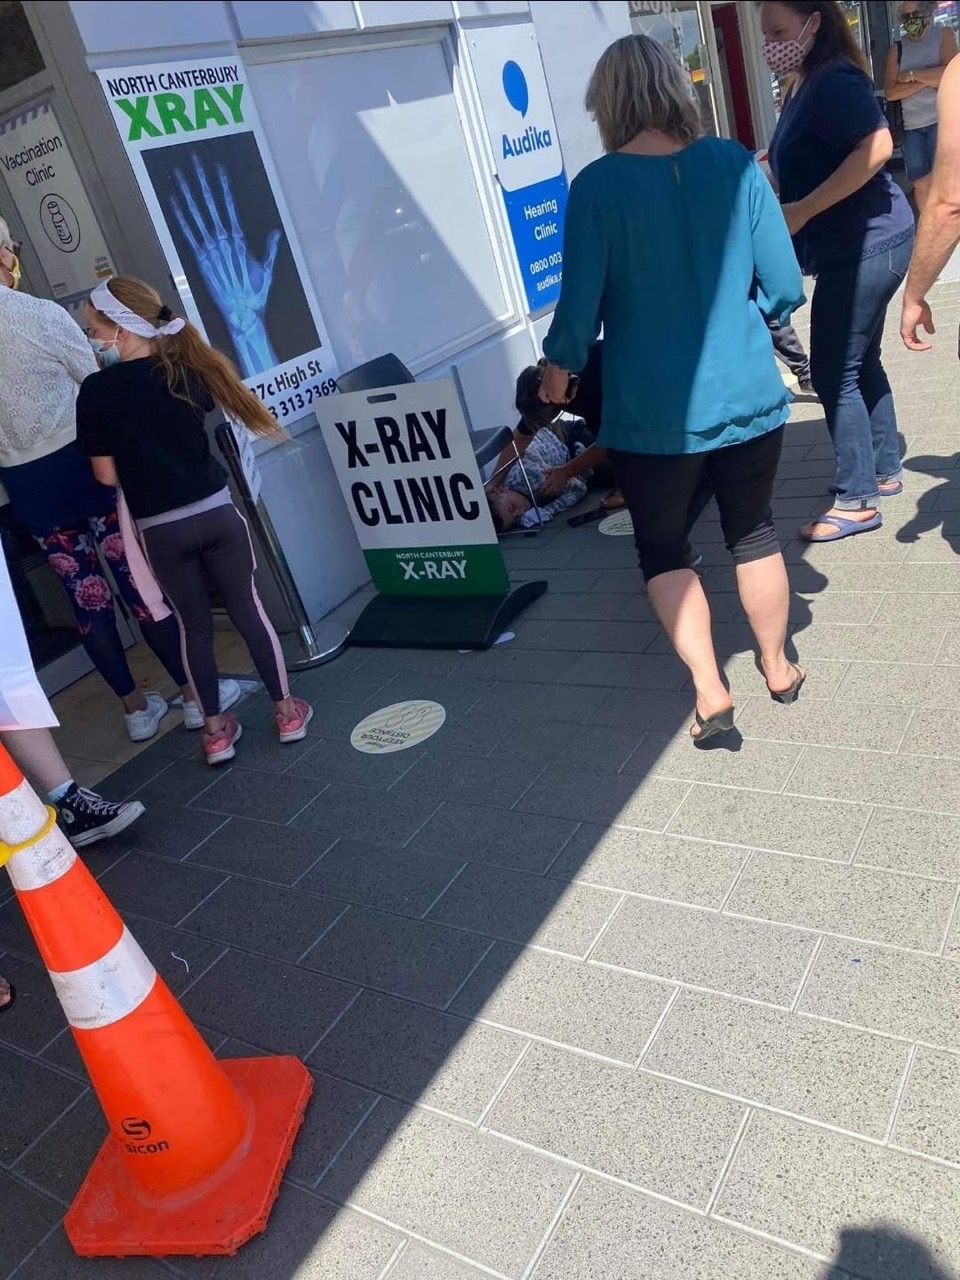 Children collapse on first day of vaccinating children in New Zealand! Vaccinators & media sweep it all under the carpet